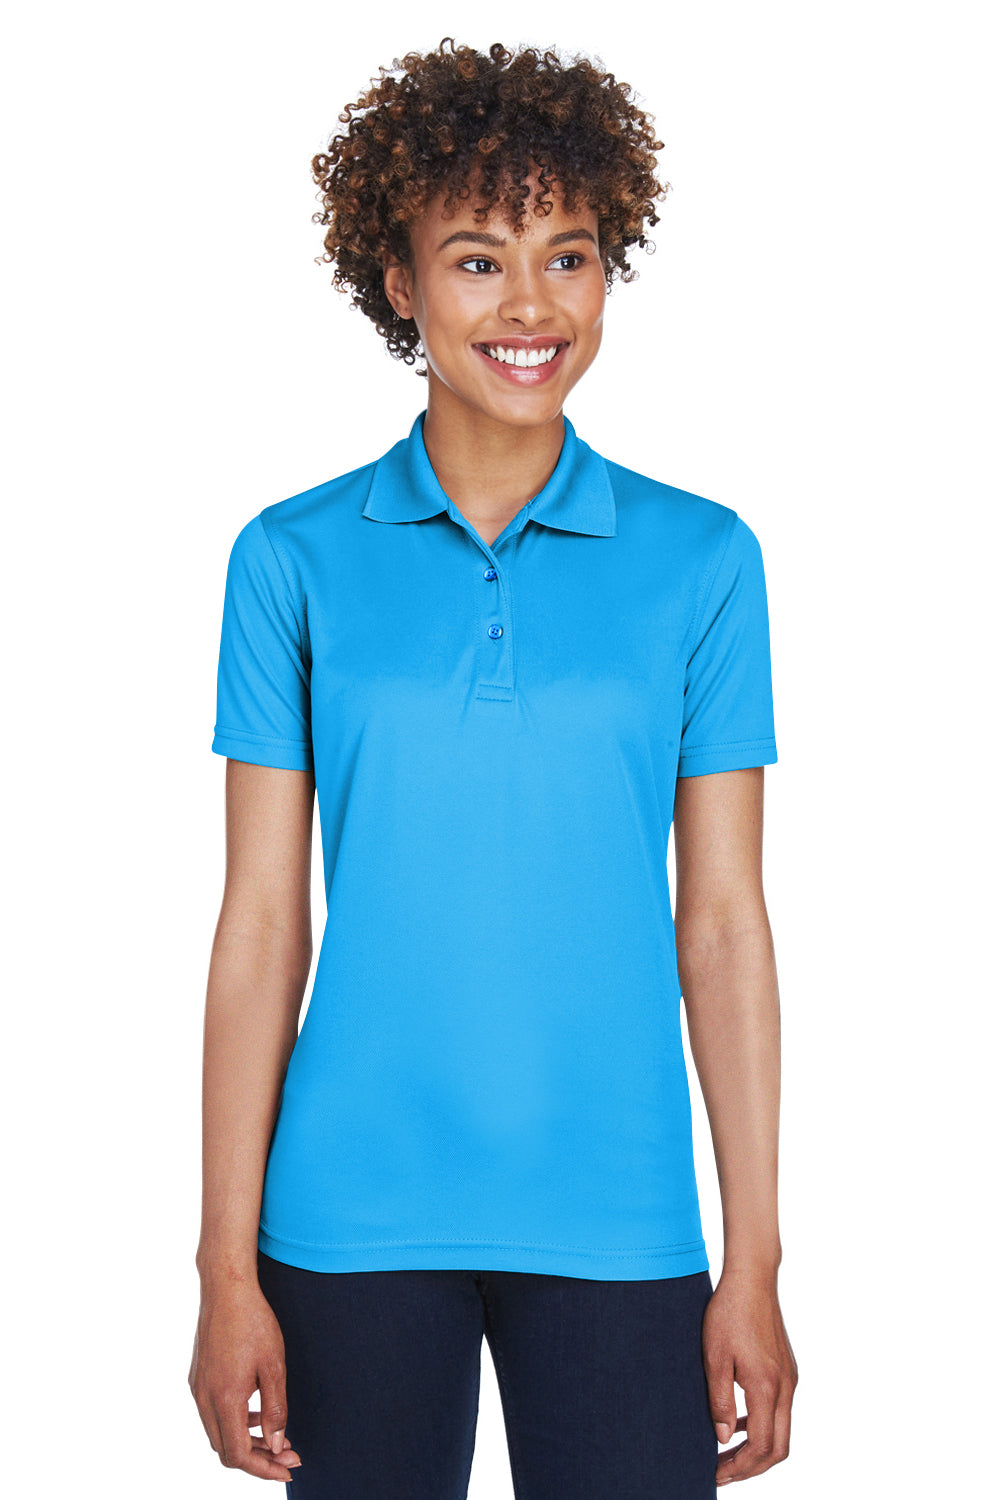 UltraClub 8210L Womens Cool & Dry Moisture Wicking Short Sleeve Polo Shirt Coast Blue Front